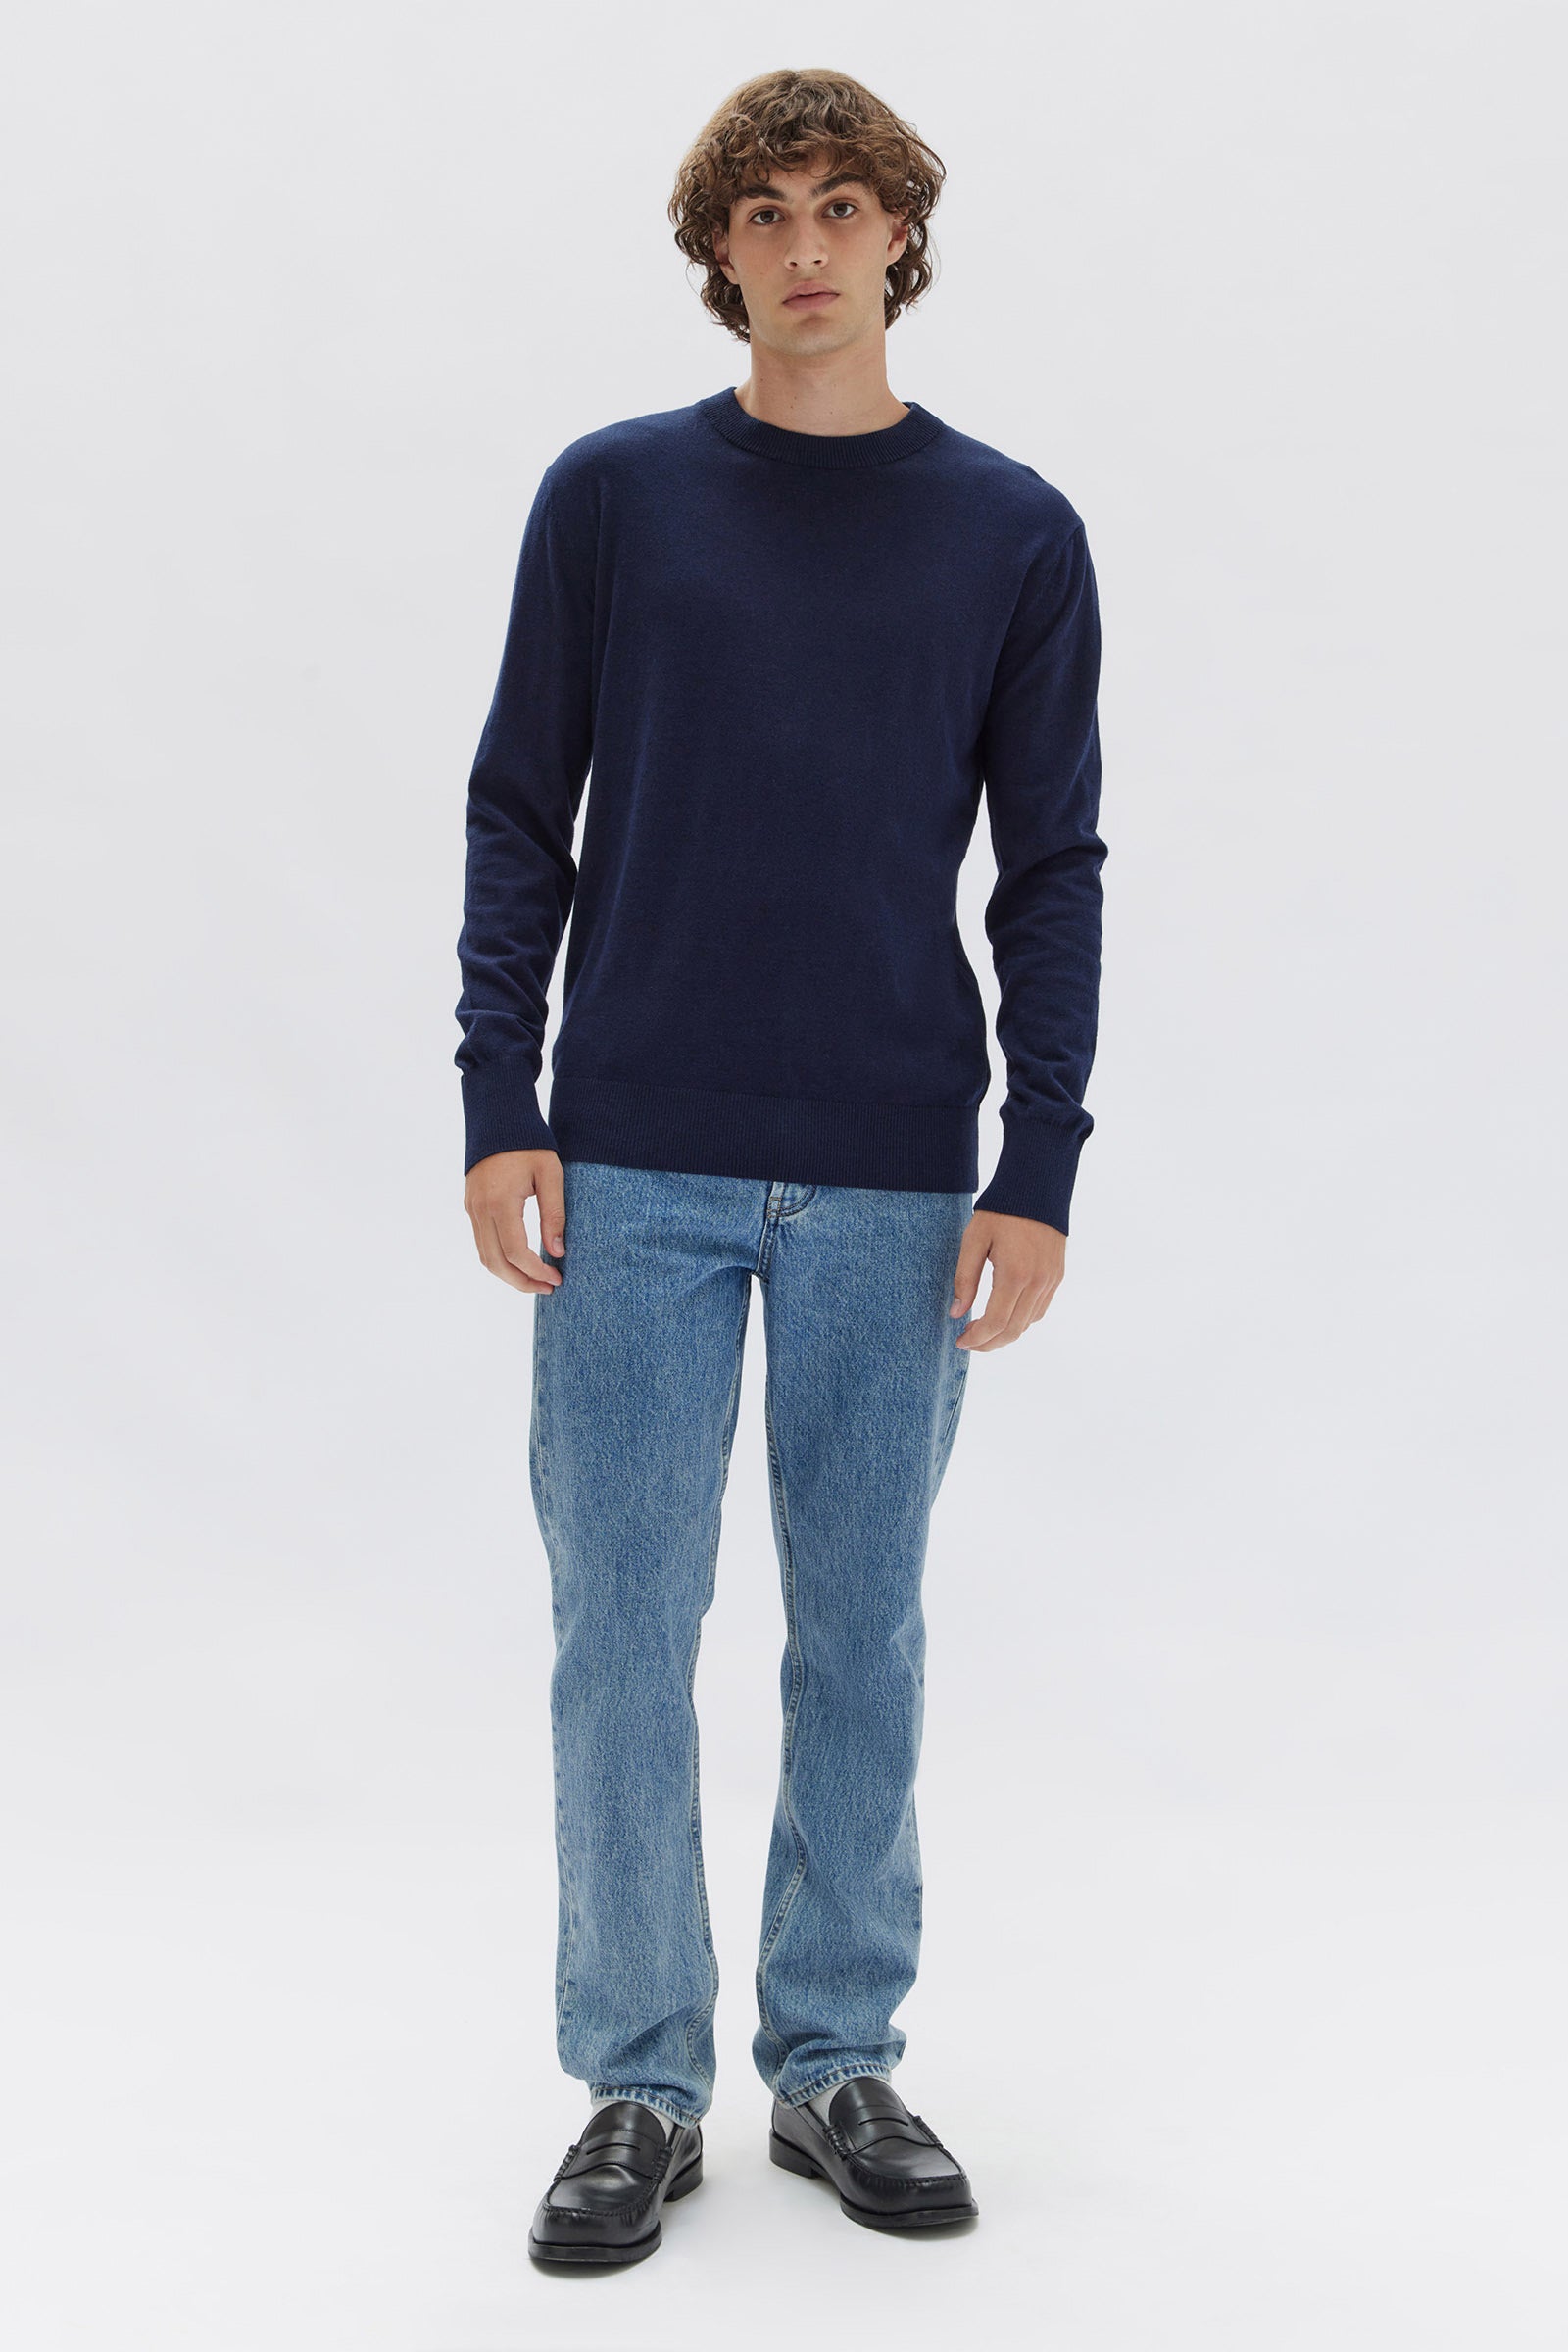 Assembly Label | Cotton Cashmere Long Sleeve Sweater - Blue